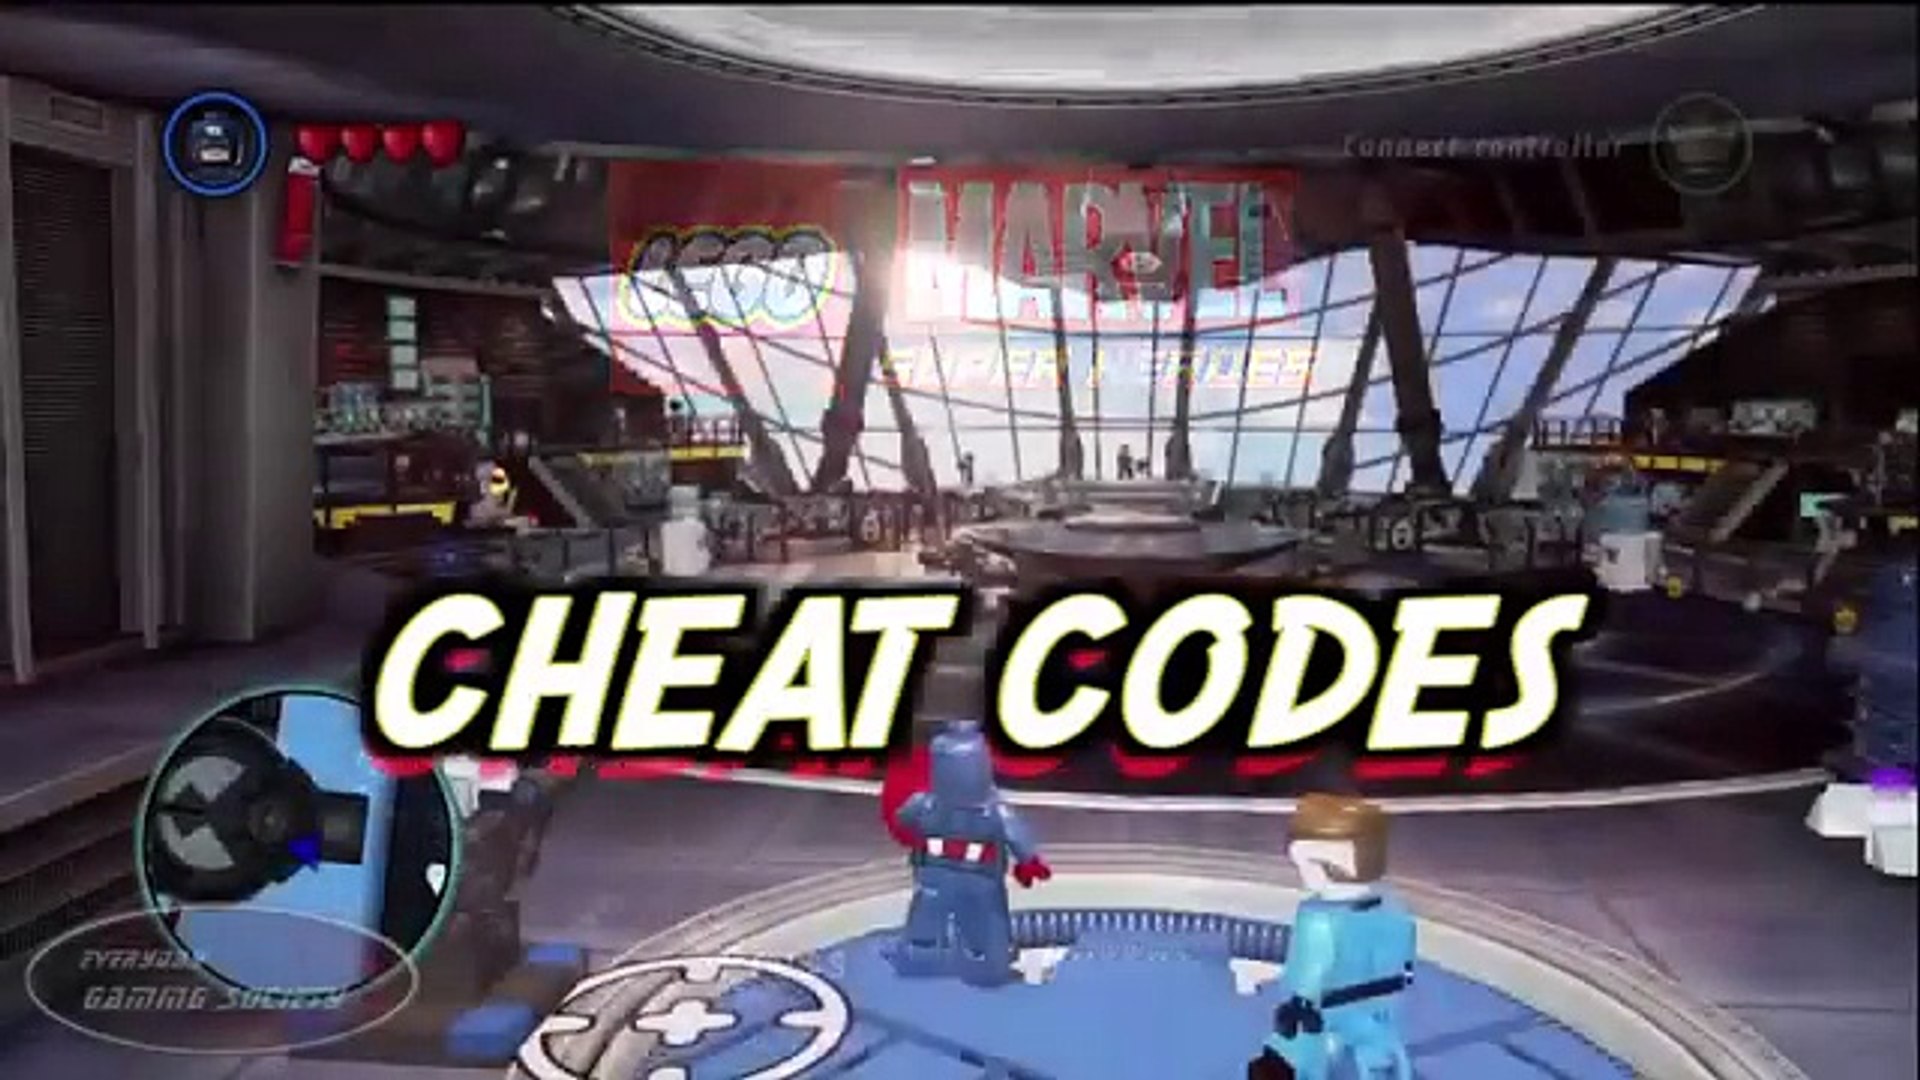 Lego Marvel Super Heroes Cheat Codes